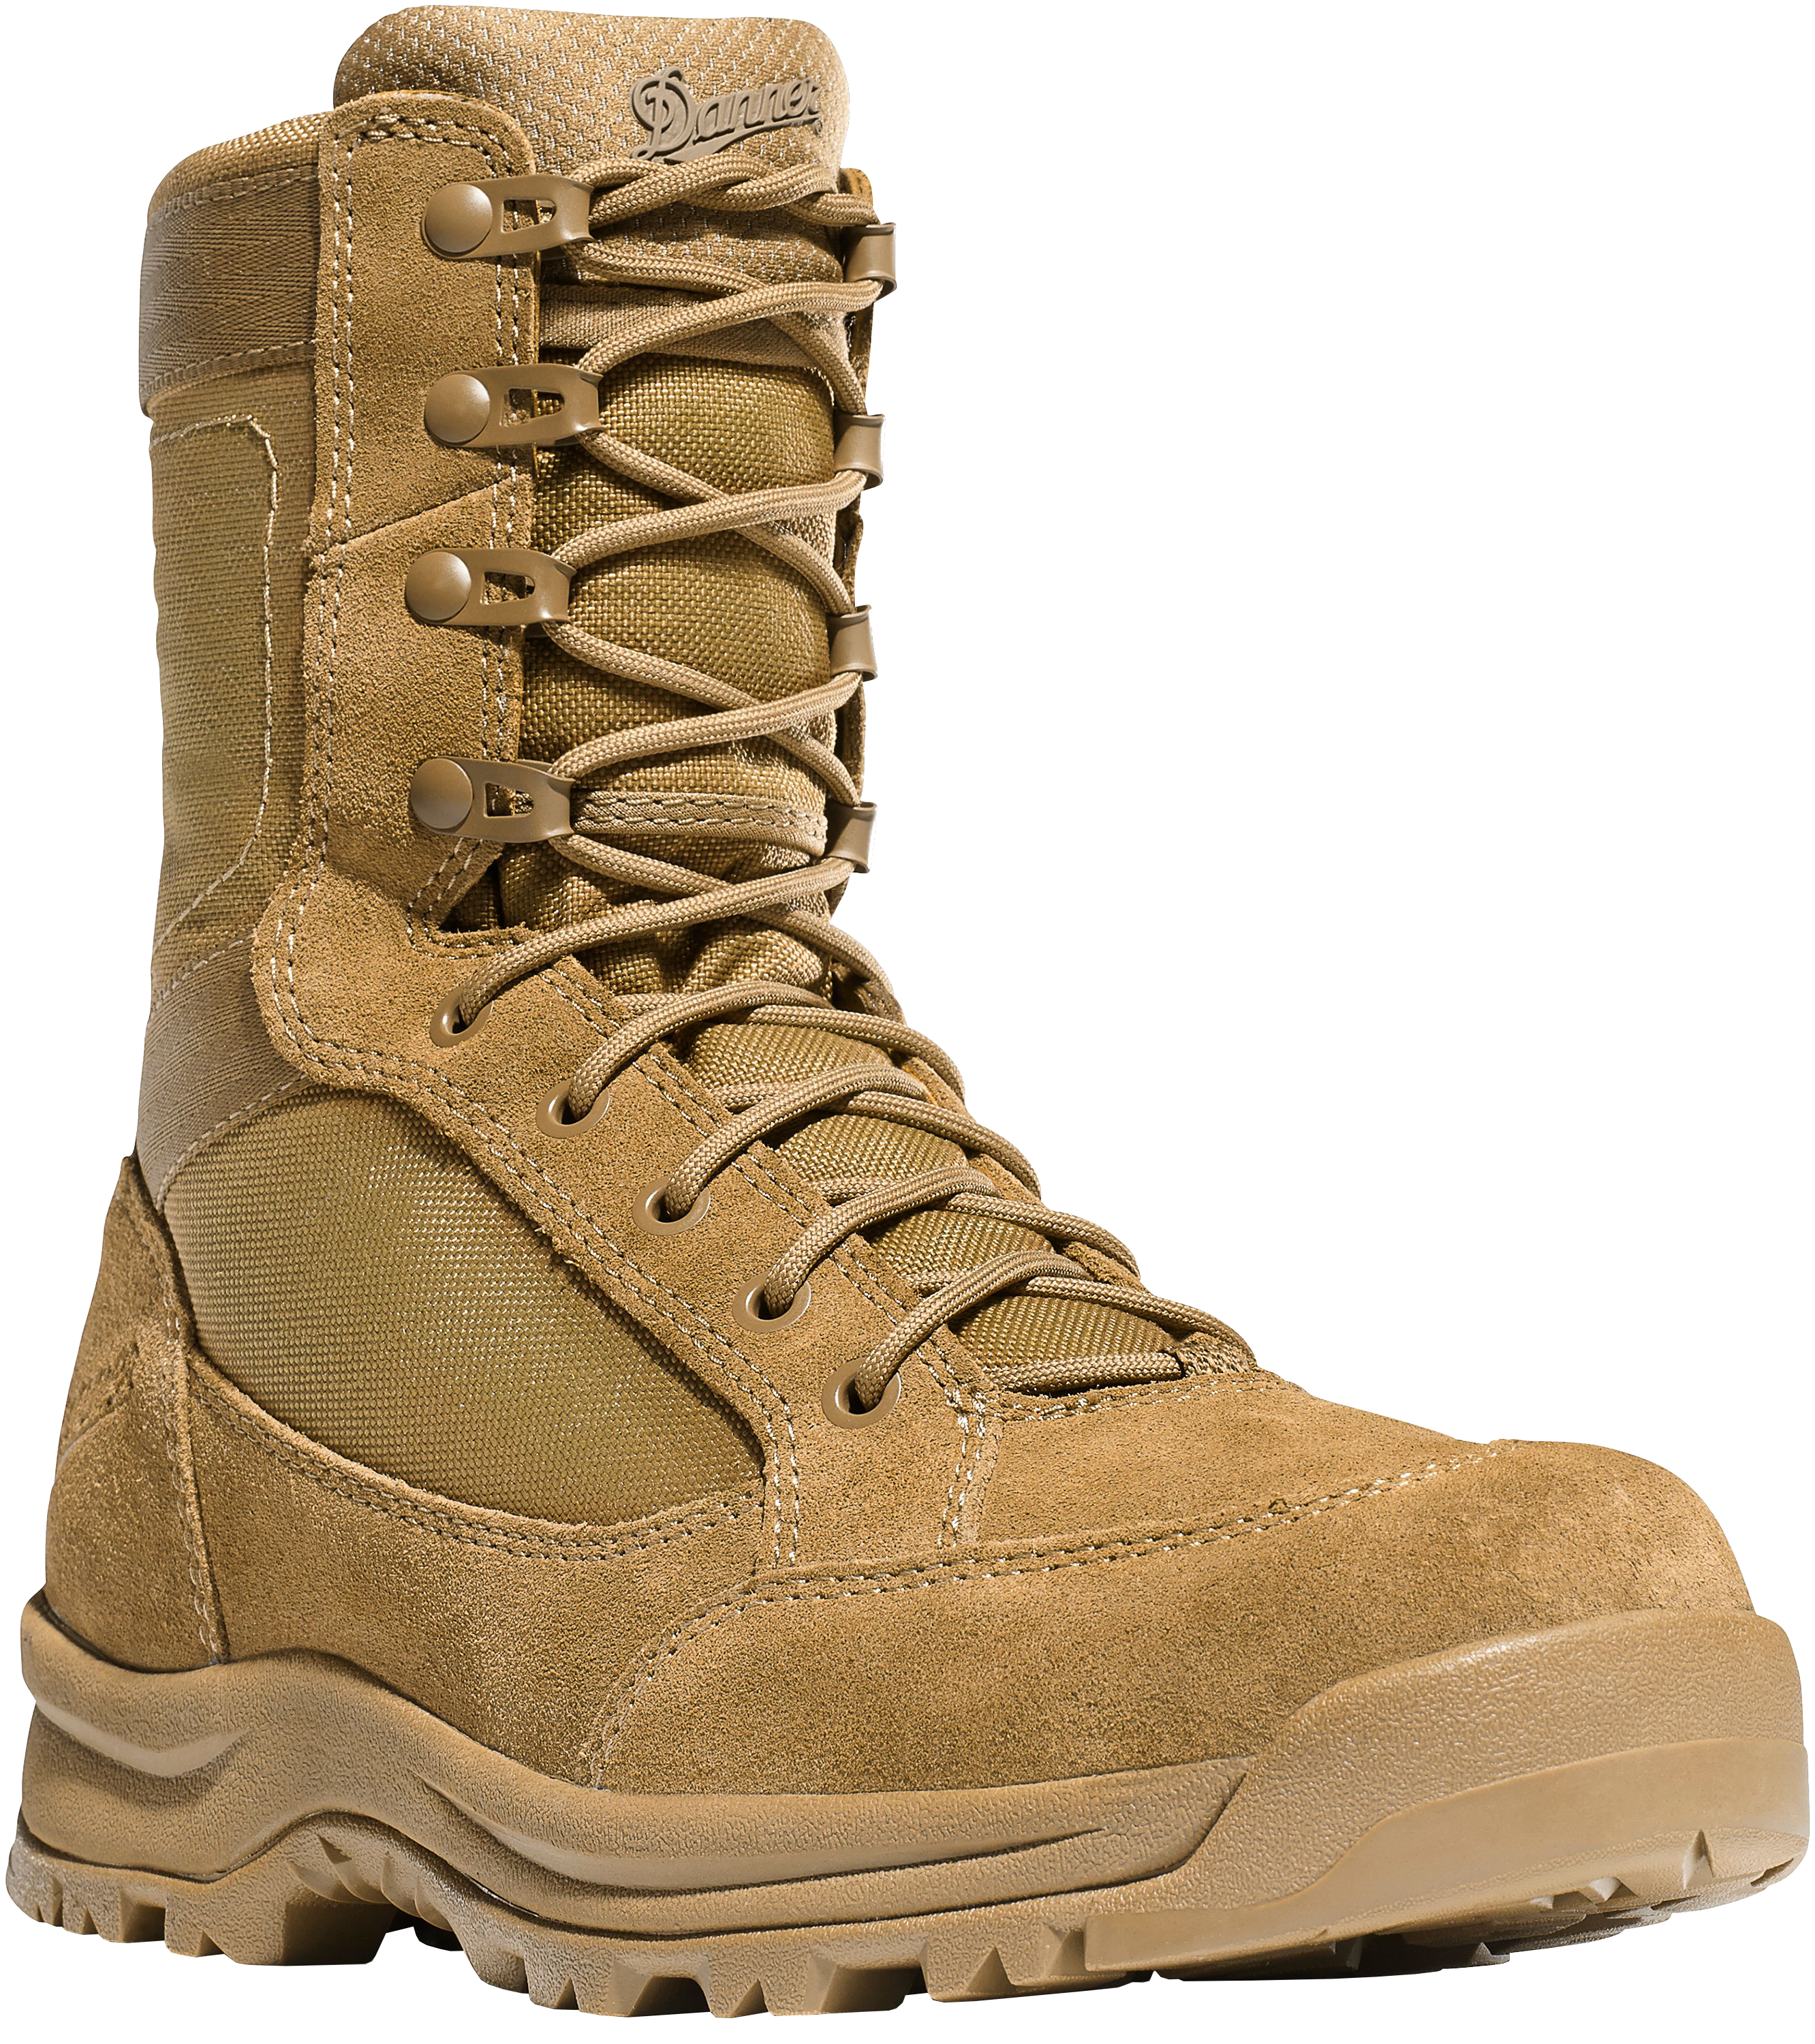 Danner Tanicus 8"" Tactical Duty Boots for Men - Coyote - 3W